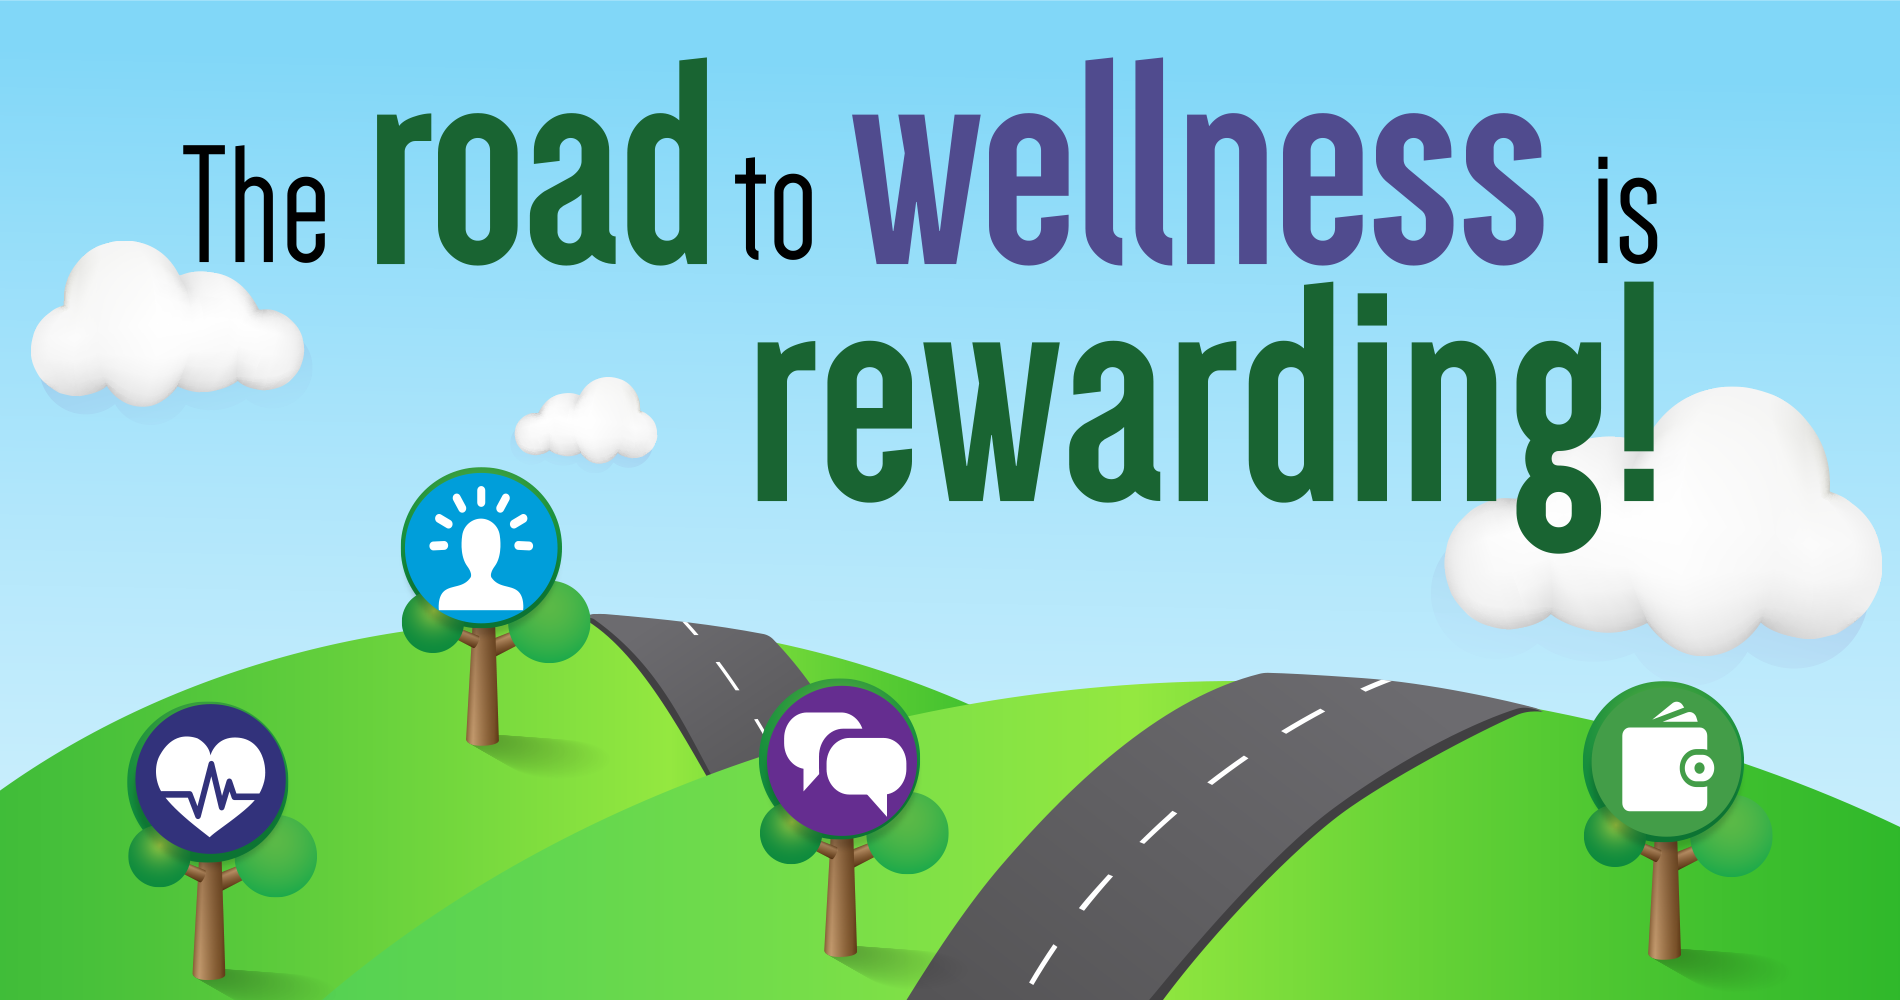 The road to wellness is rewarding illustration with curving roads over hills and icons for physical, emotional, social and financial well-being